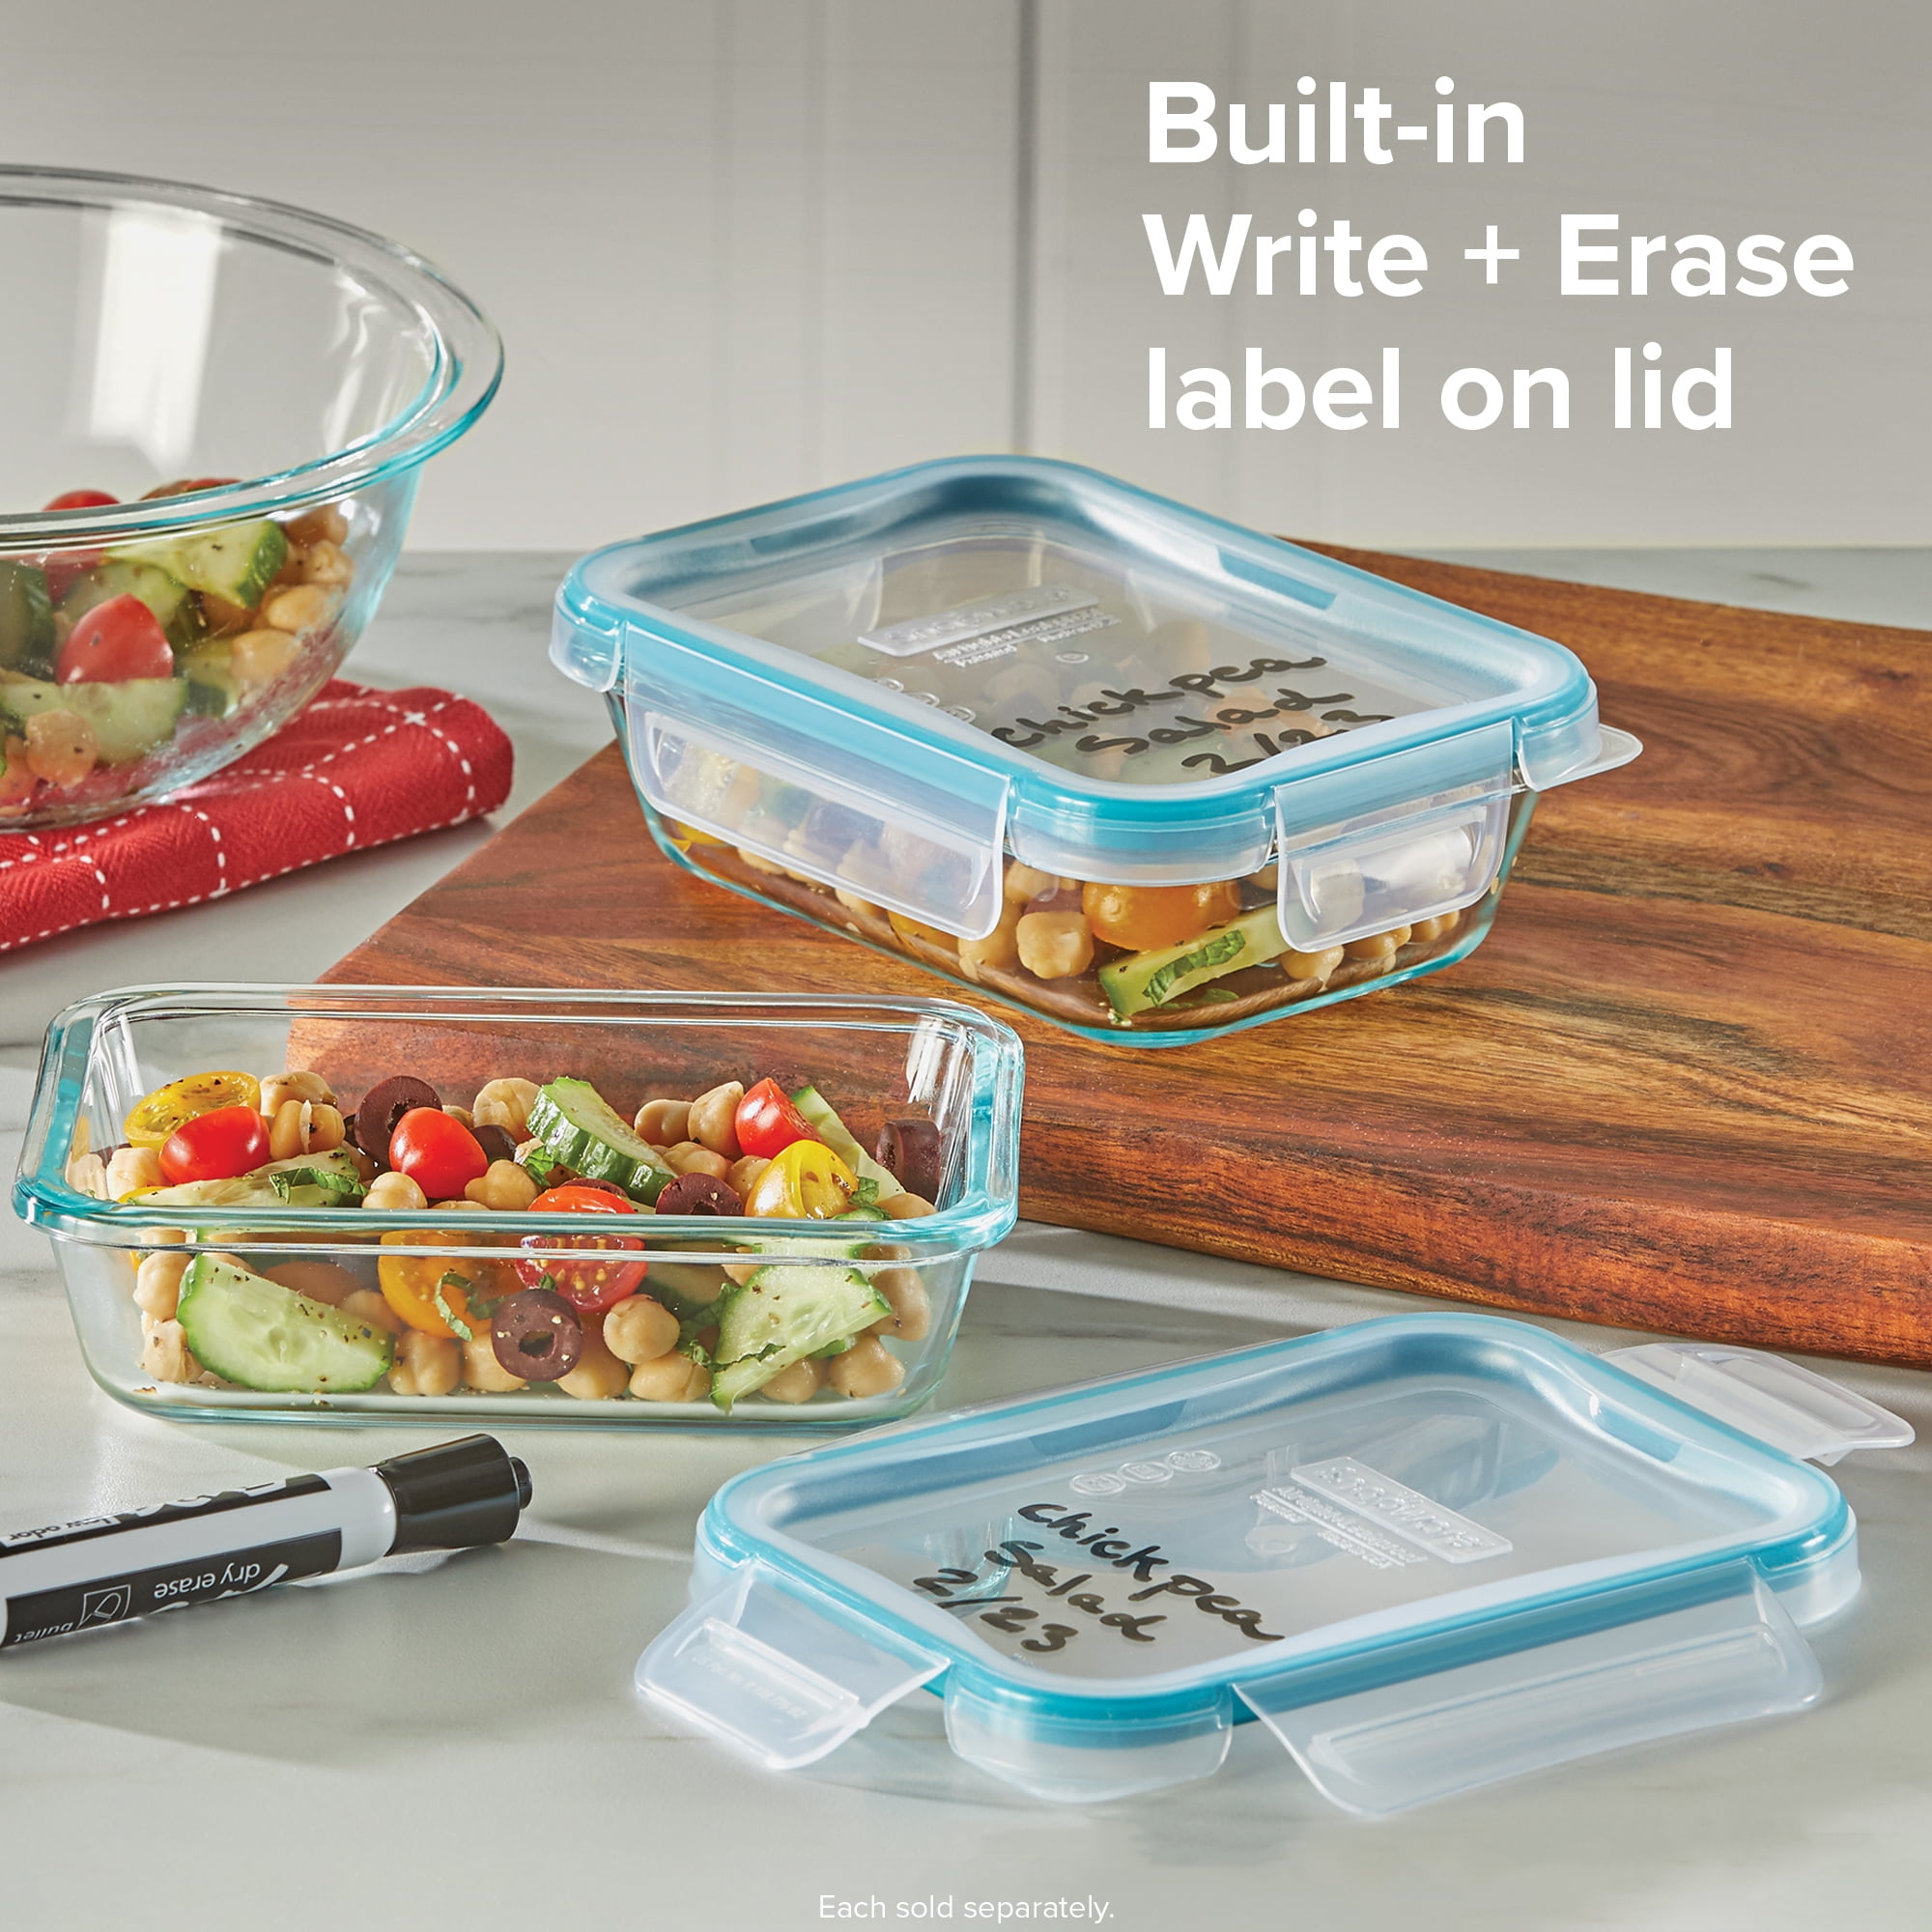 Circleware Snap Lid Square Glass Container Set, 2-Piece